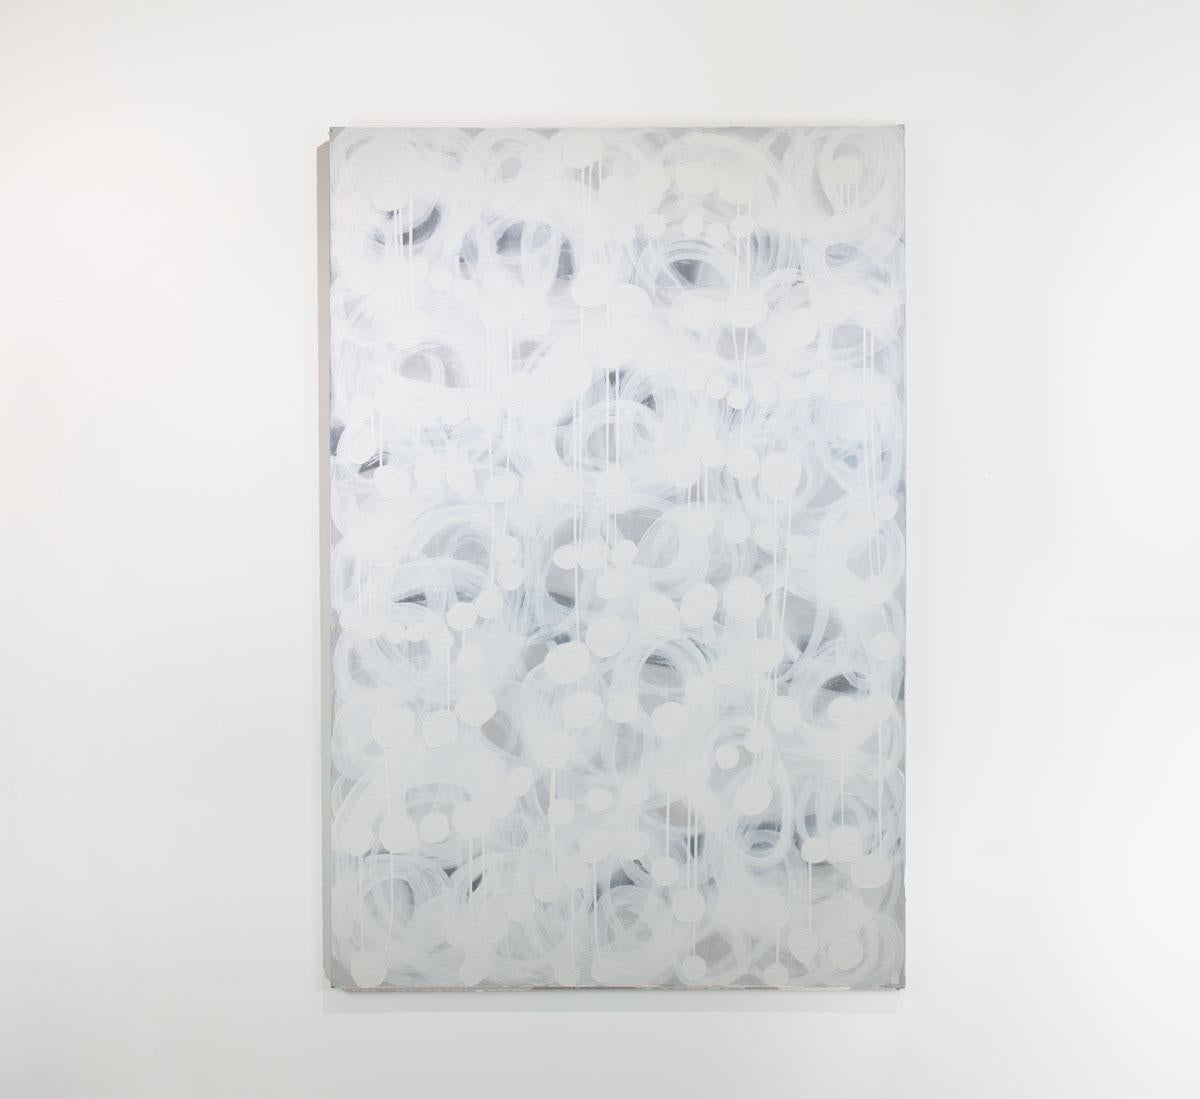 This large abstract statement painting by Sofie Swann features a white and light grey palette, with loose brush strokes which in energetic concentric circles throughout the canvas, layered over smaller white circle shapes. This painting is made on